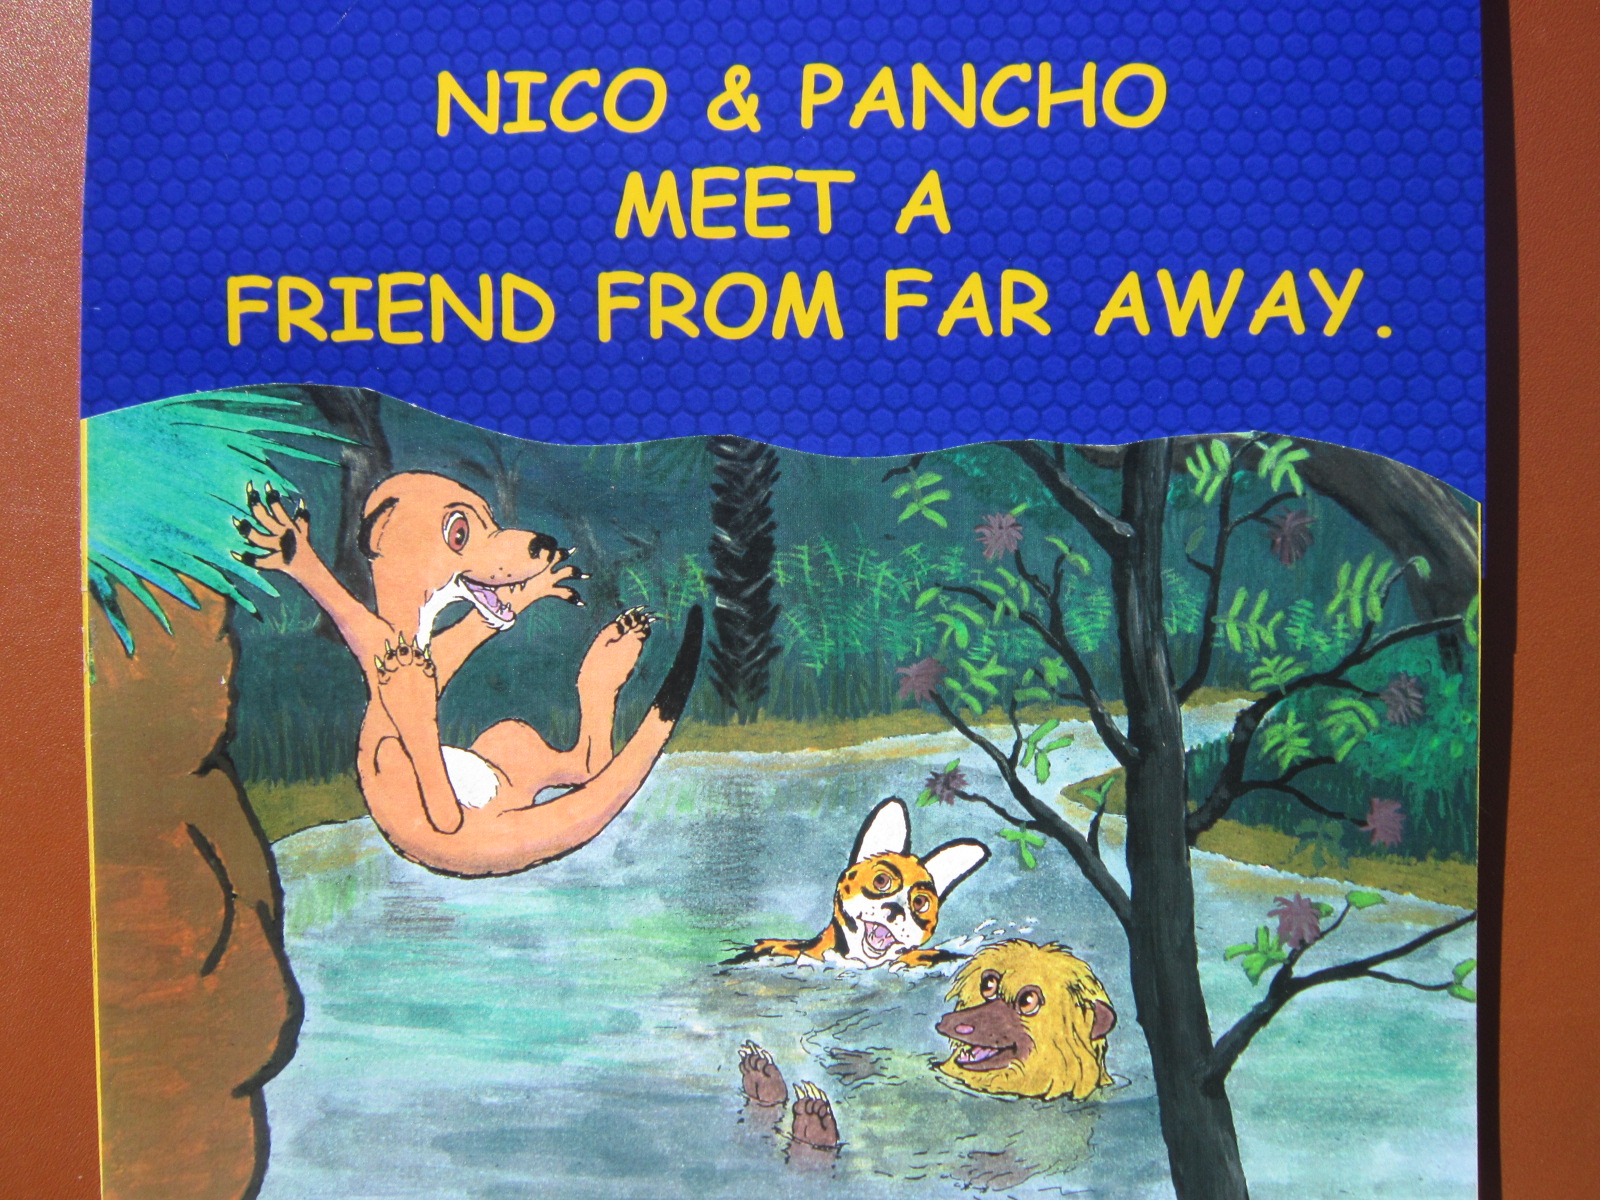 Nico and Pancho #1 Nico and Pancho Meet a Friend From Far Away